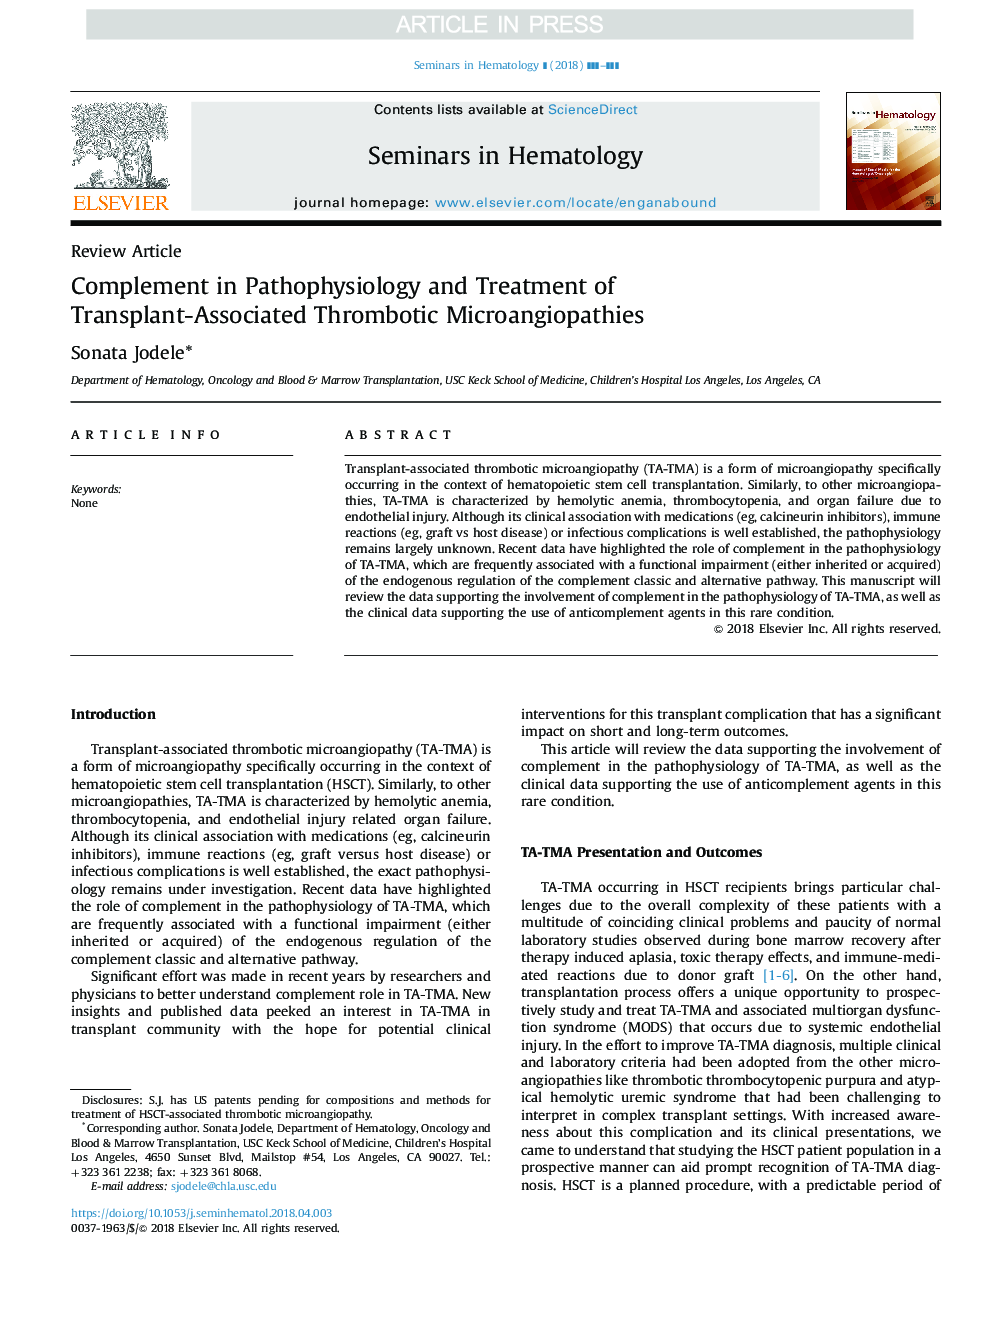 Complement in Pathophysiology and Treatment of Transplant-Associated Thrombotic Microangiopathies